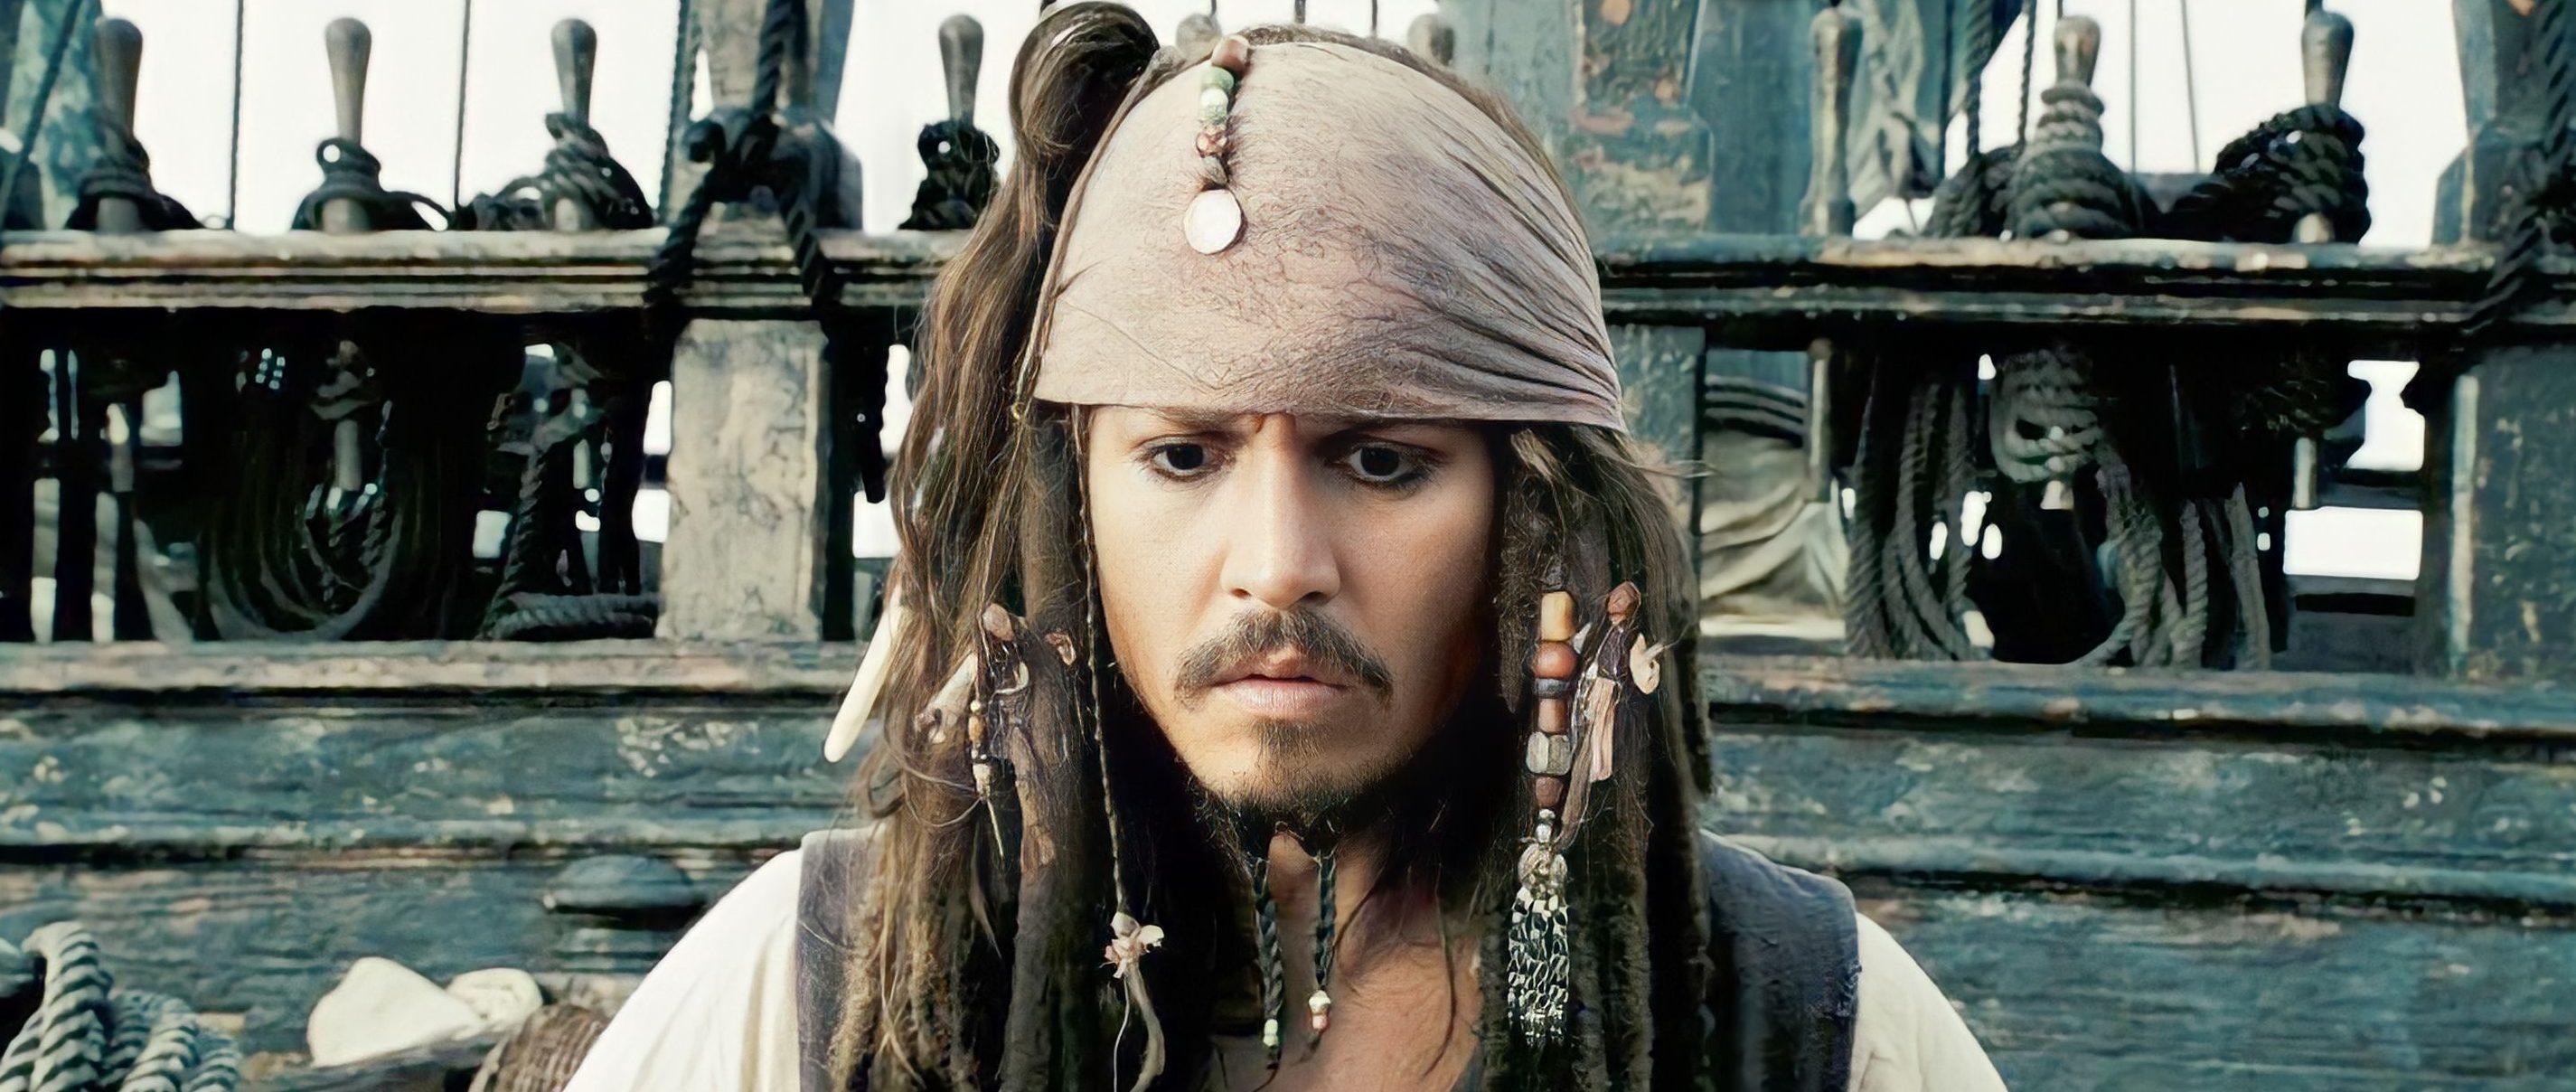 Disney Reportedly Developing a Pirates of the Caribbean Series